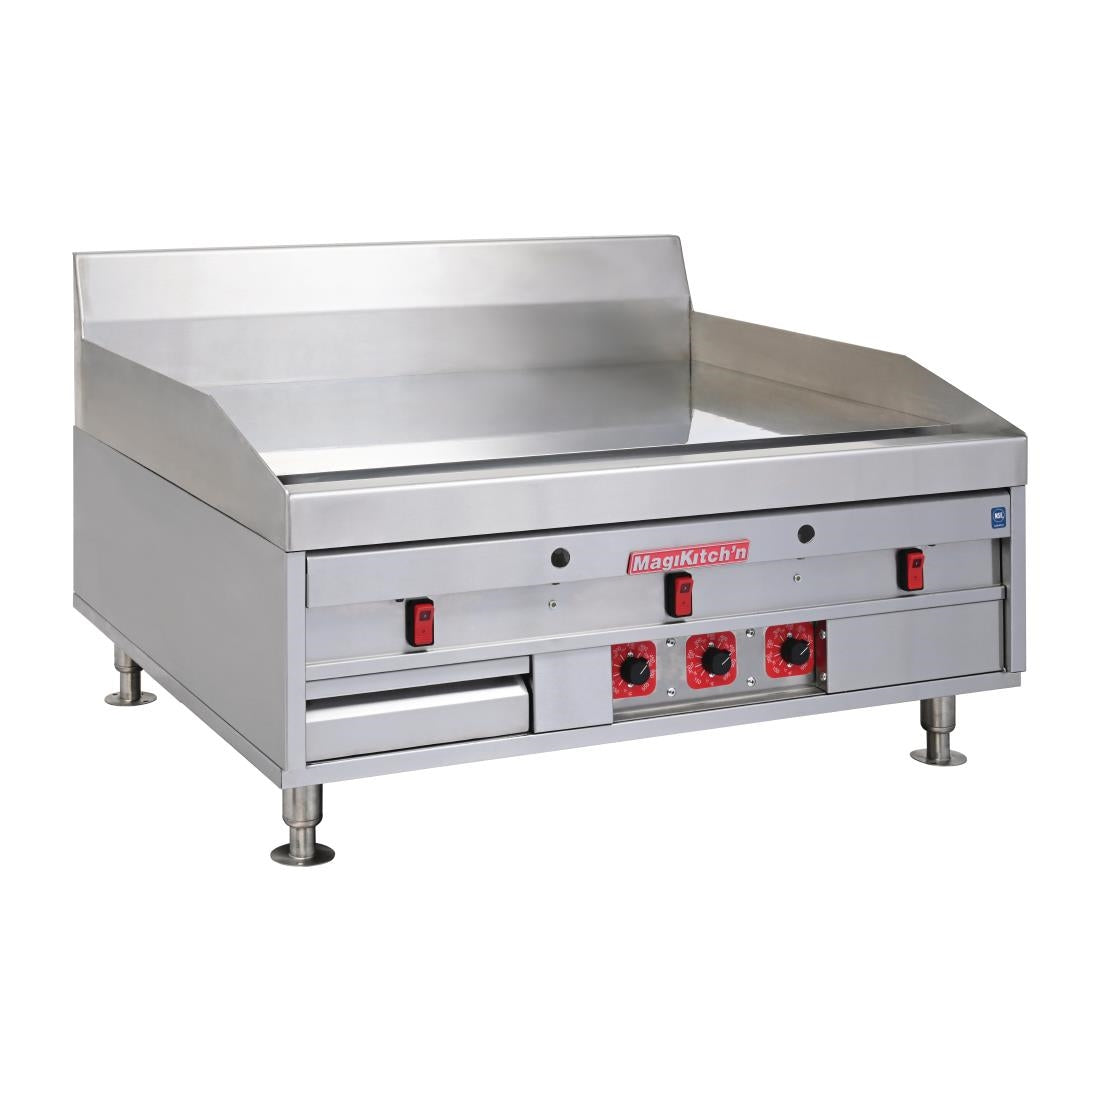 FP886 MagiKitch'n Heavy Duty Chrome Griddle MKE48 JD Catering Equipment Solutions Ltd